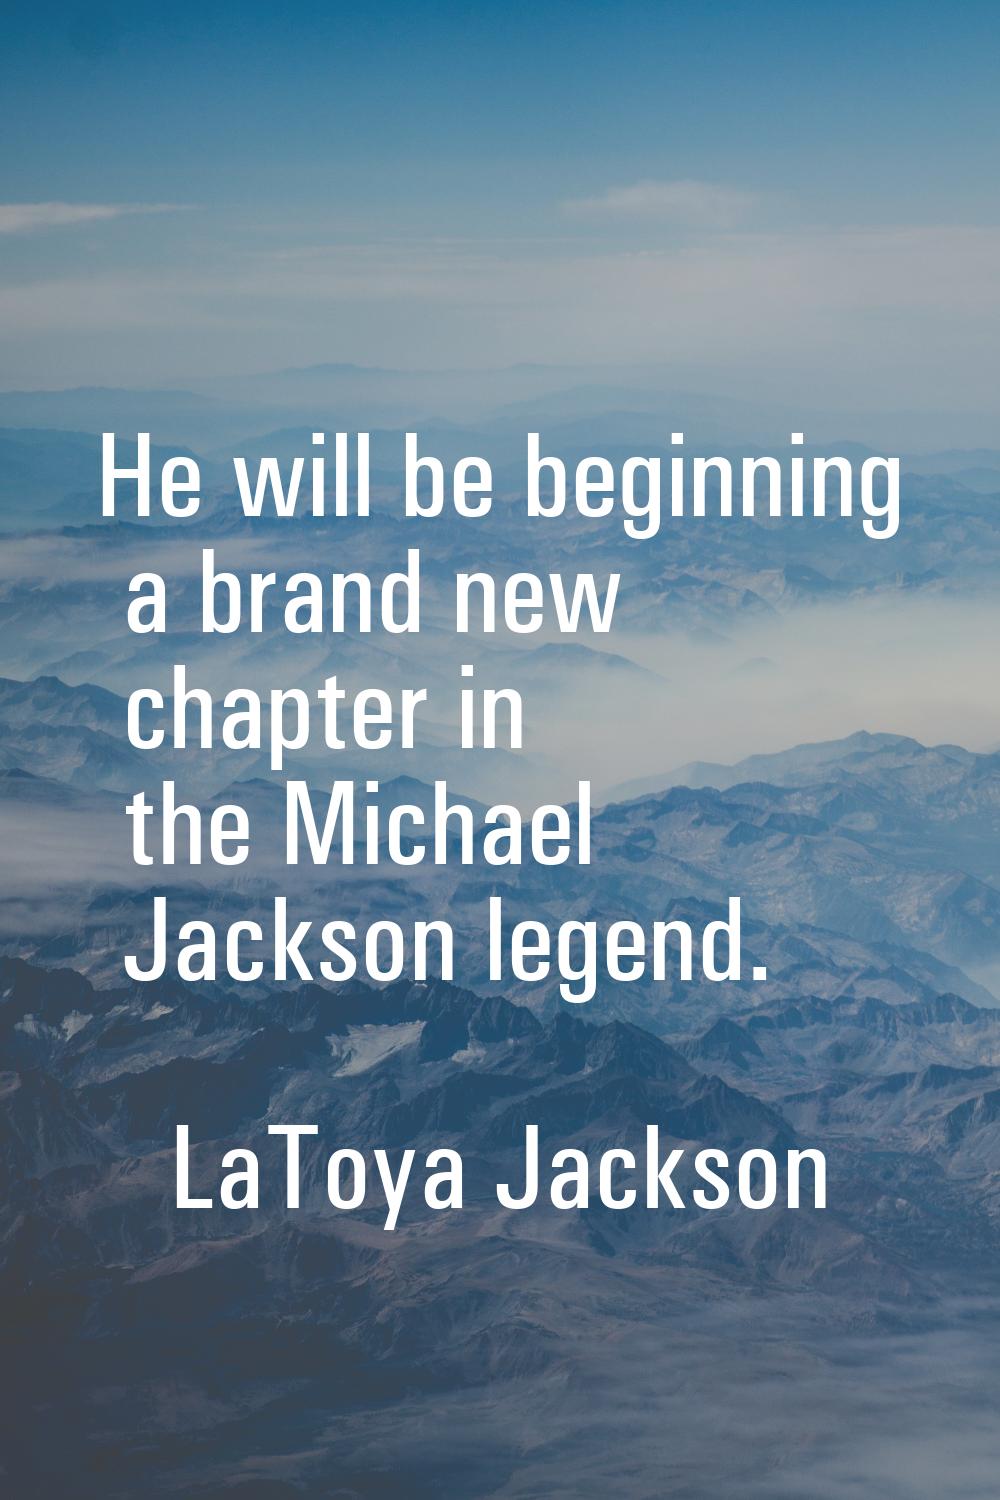 He will be beginning a brand new chapter in the Michael Jackson legend.